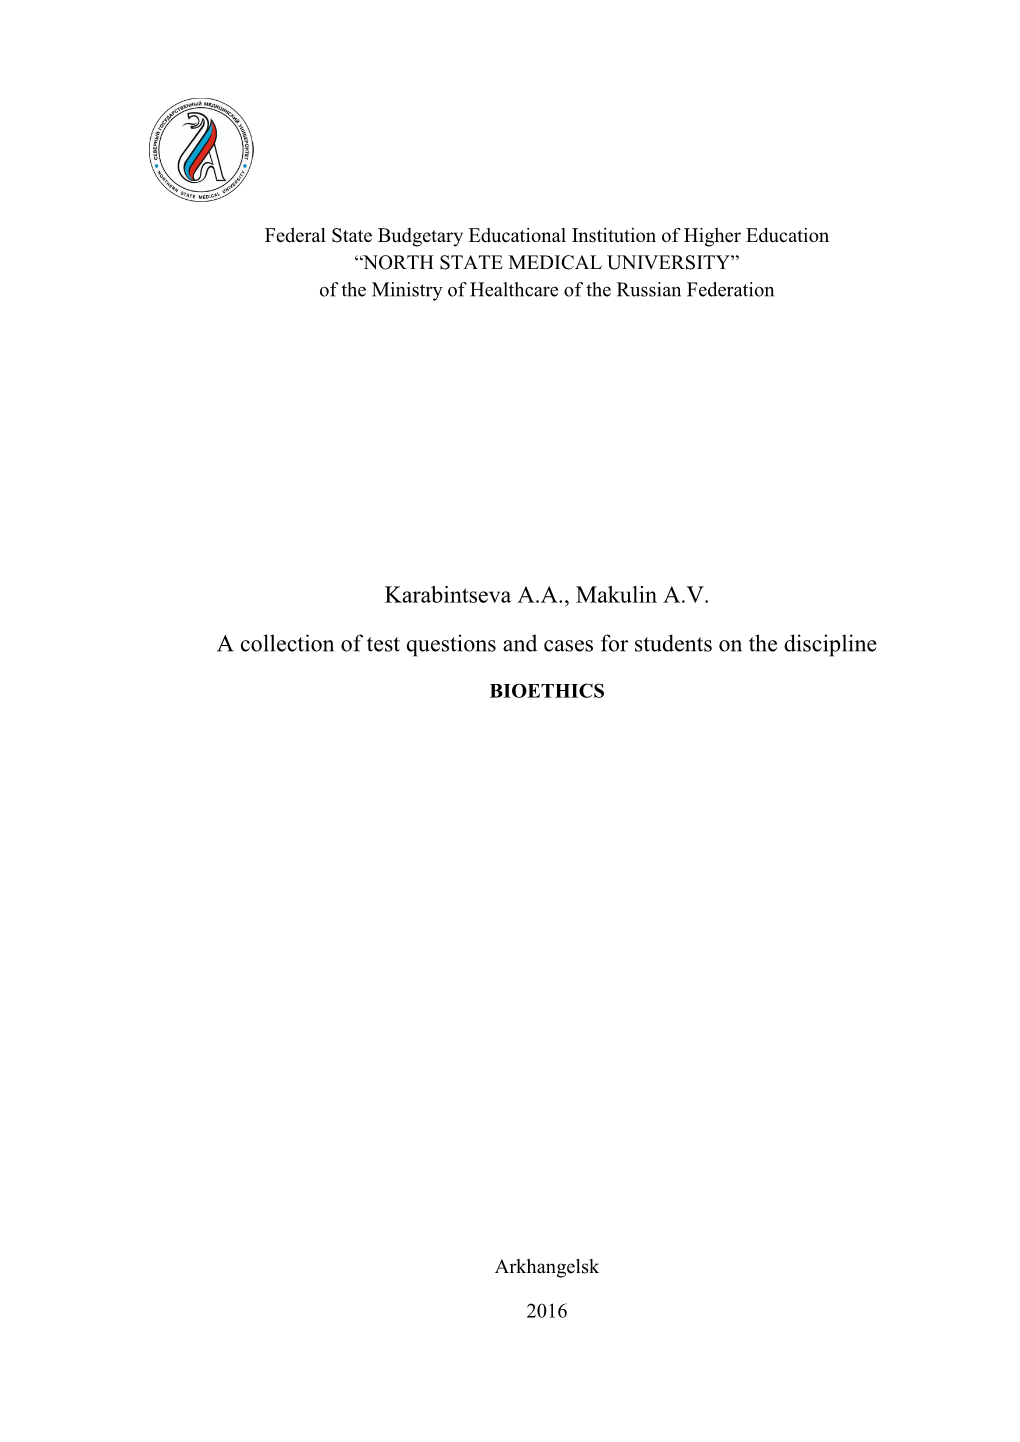 Karabintseva A.A., Makulin A.V. a Collection of Test Questions And